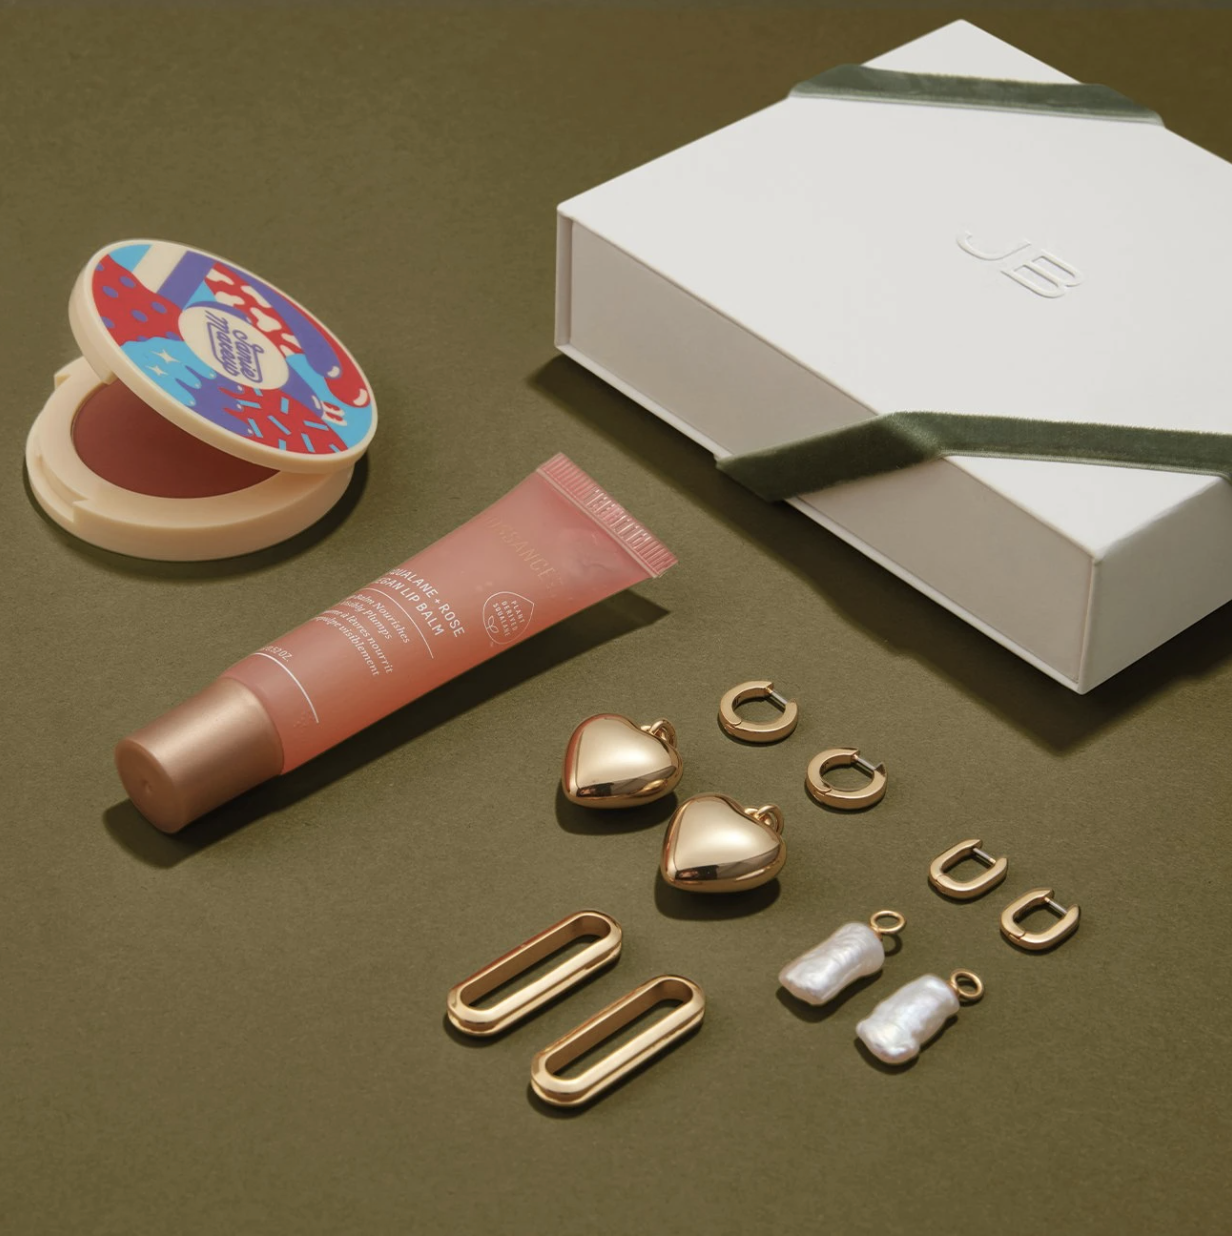 the jenny bird gift set arranged neatly on a simple backdrop; the items included a lip balm, a blush, and two pairs of customizable earrings